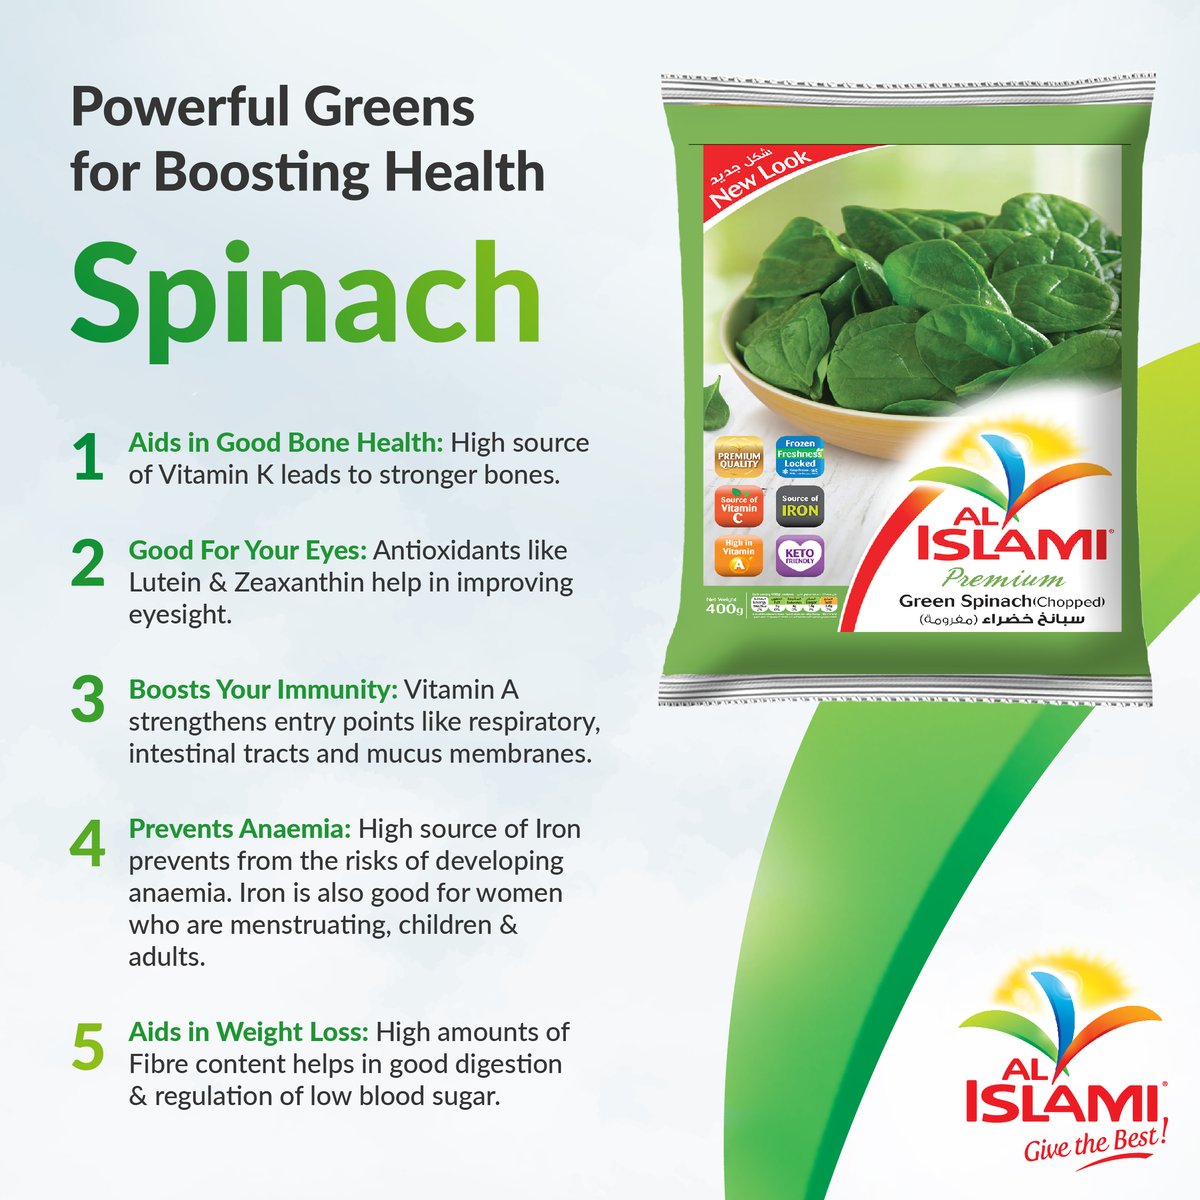 Feel the difference in the re-vitalized body with the powerhouse of nutrients and Experience the Fountain of Goodness with our finely selected Spinach.

alislamifoodsonline.com

#bestfood #sharingfood #food #premiumfood #alislamifoods #alislamipremium #halal #foodies